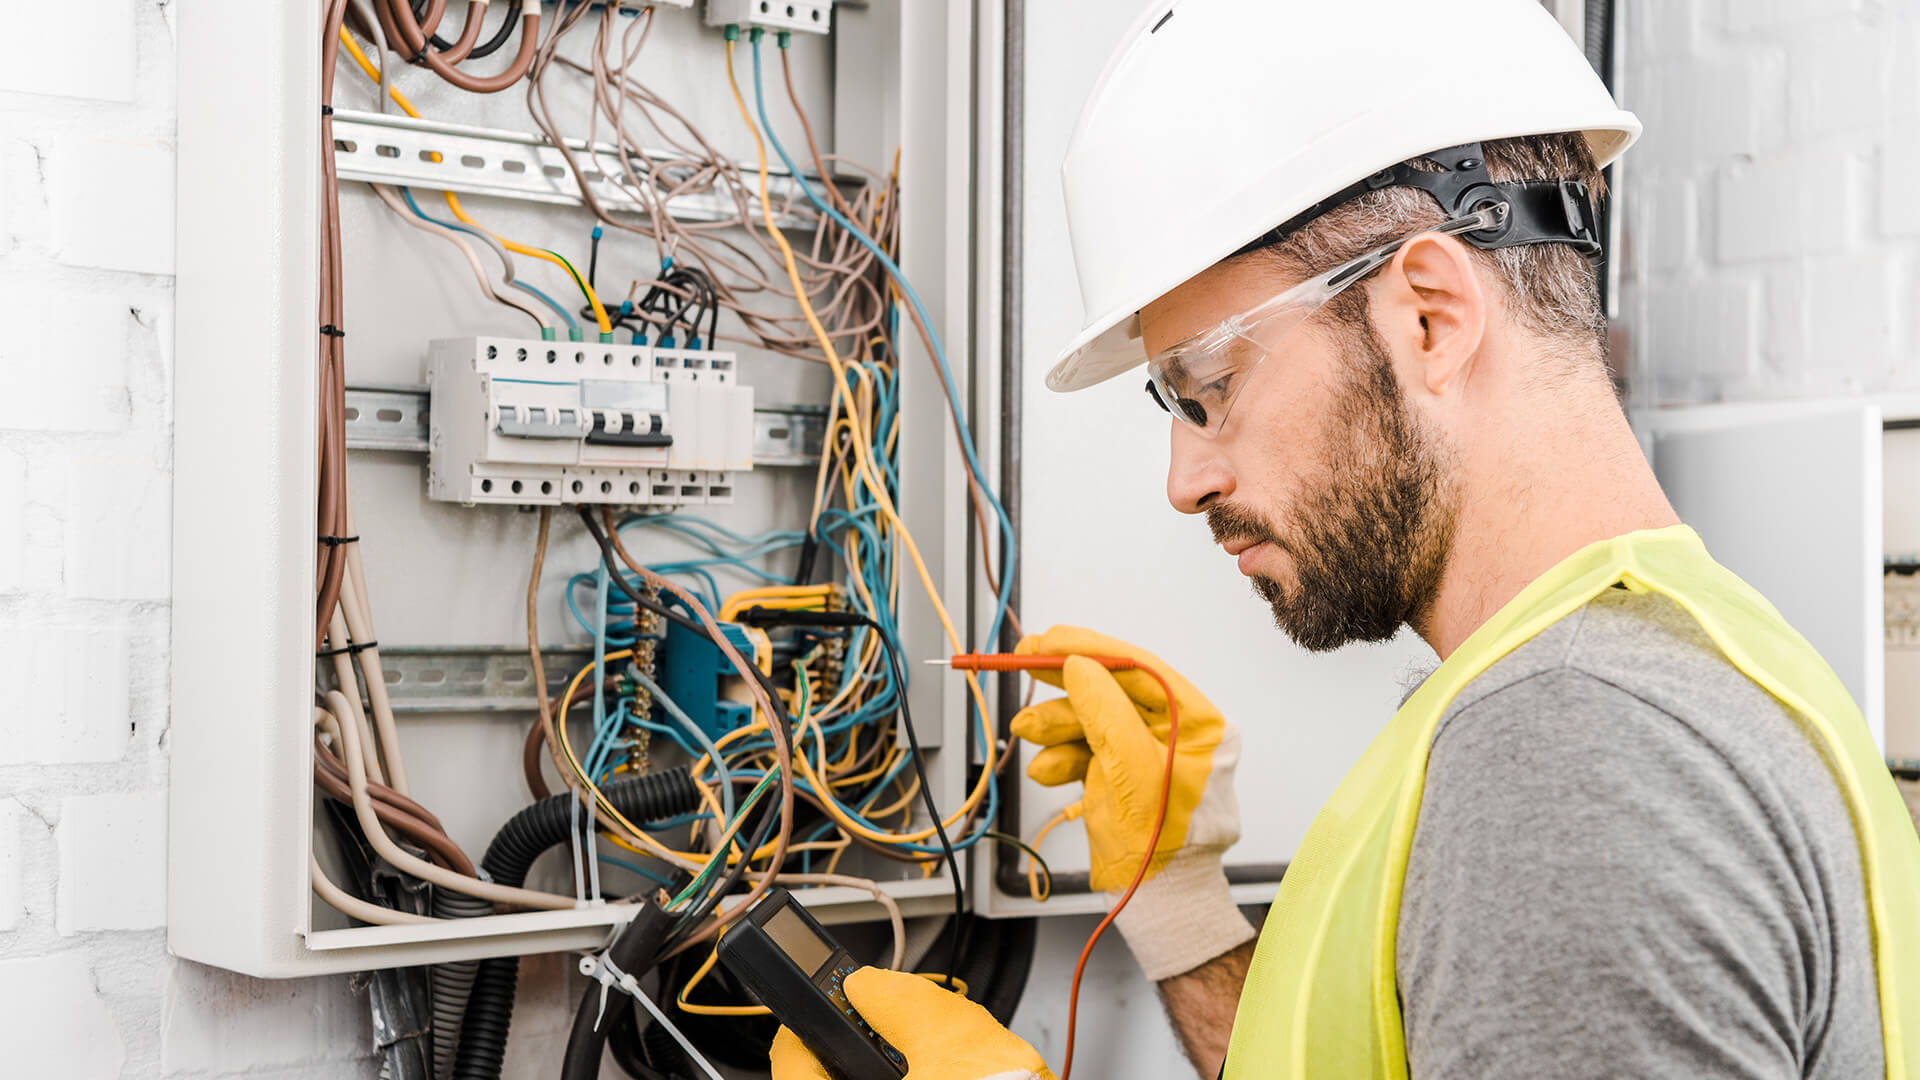 7 Things to Consider When Hiring a Residential Electrician - Build Magazine